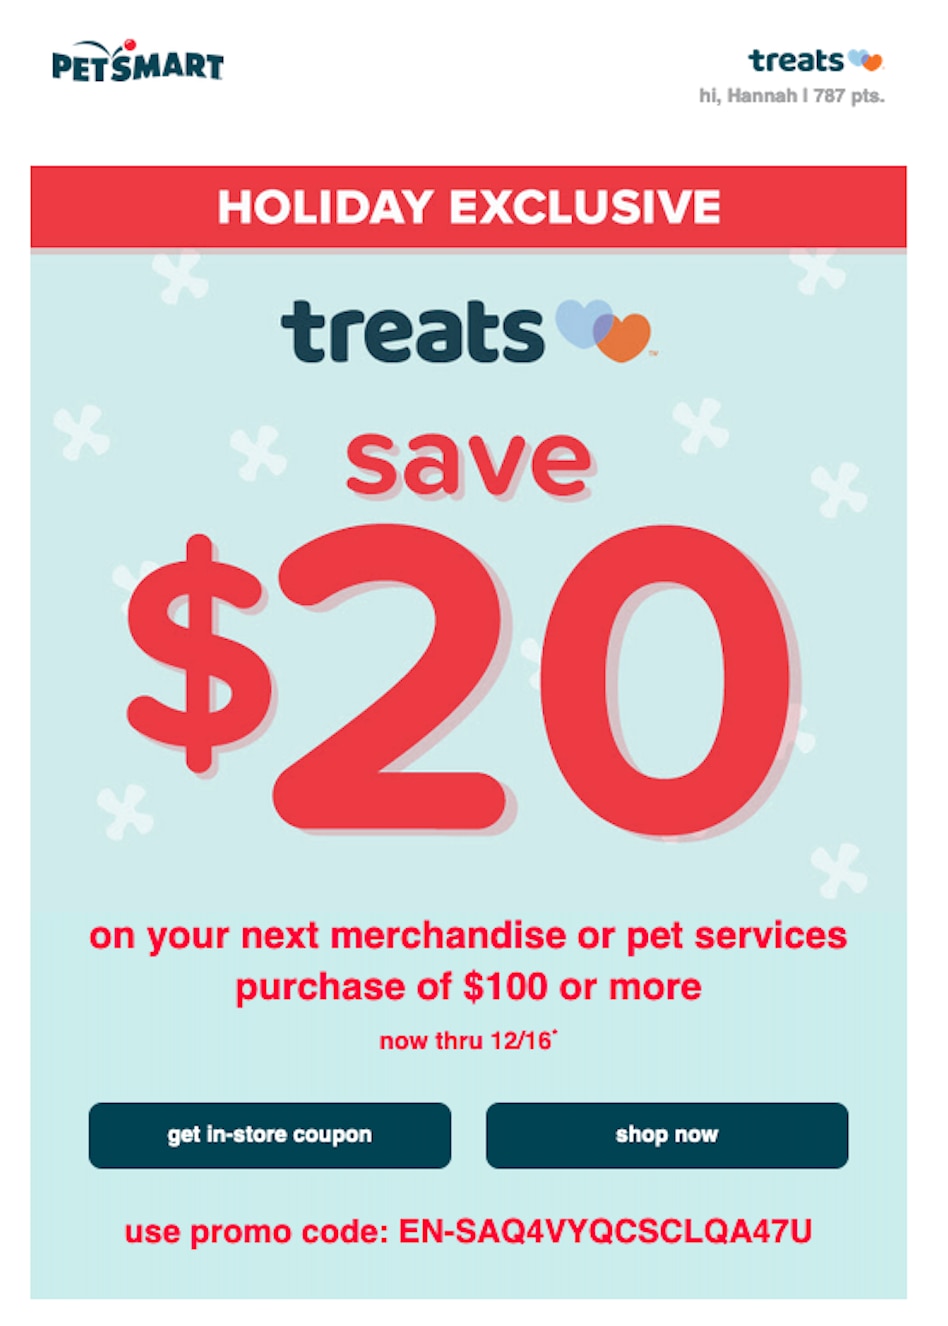 example of petsmart discount email